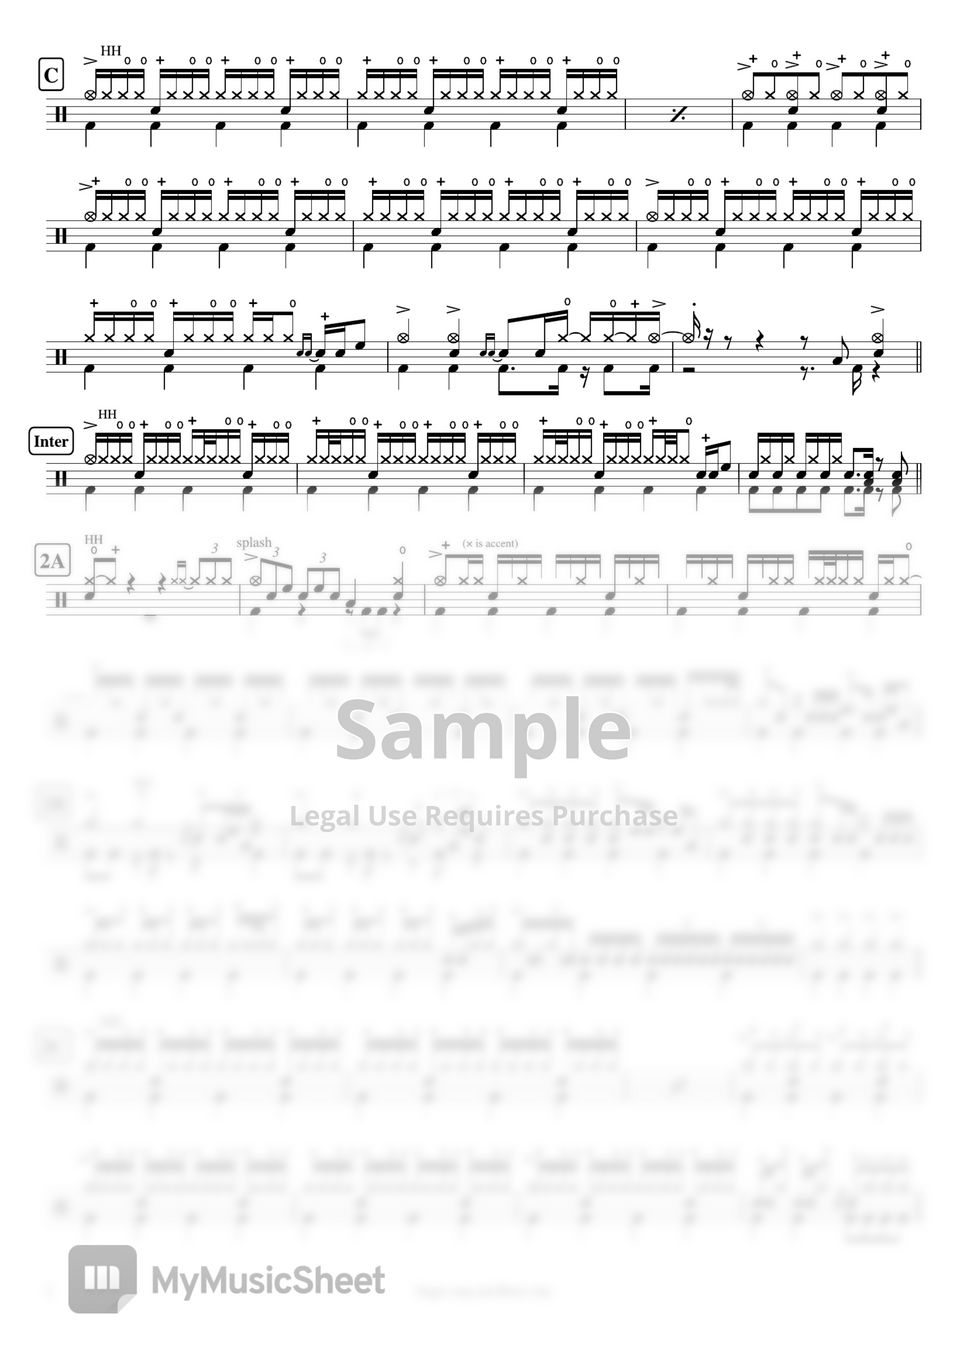 UNISON SQUARE GARDEN - Sugar song and Bitter step Sheet by Cookai's J-pop Drum sheet music!!!